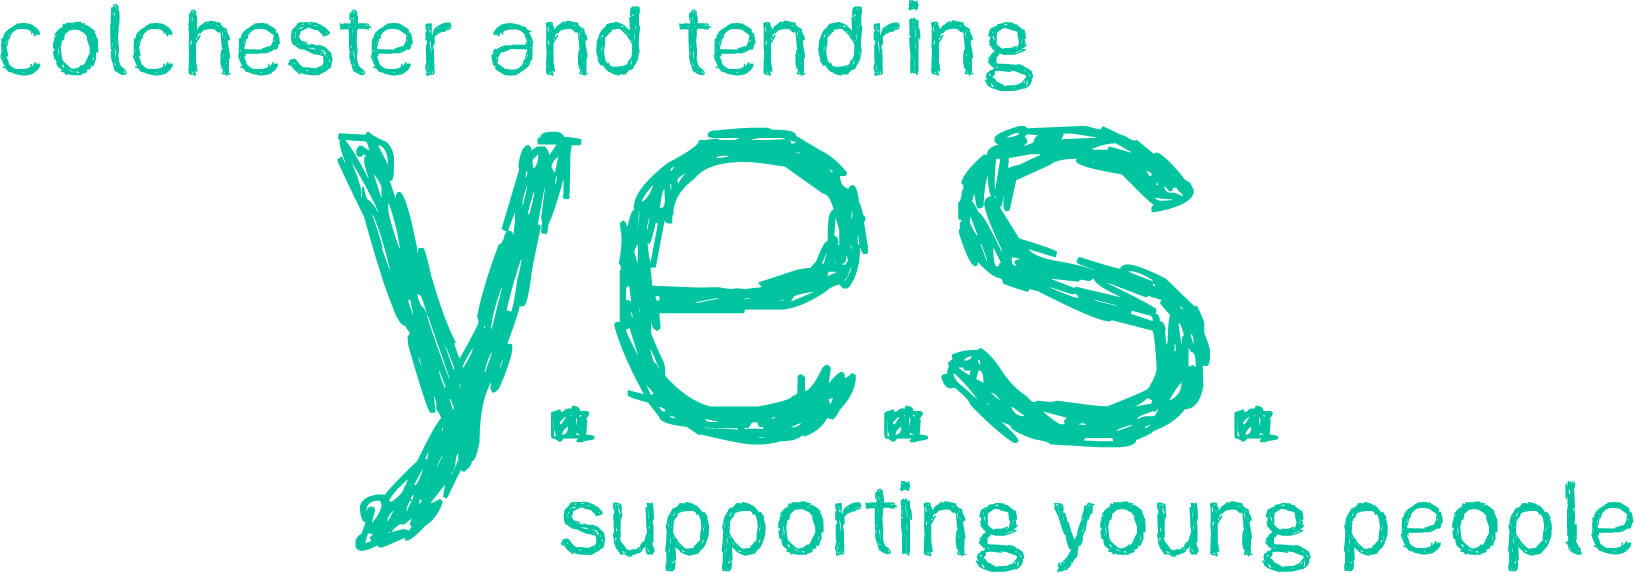 Colchester and Tendring YES Logo